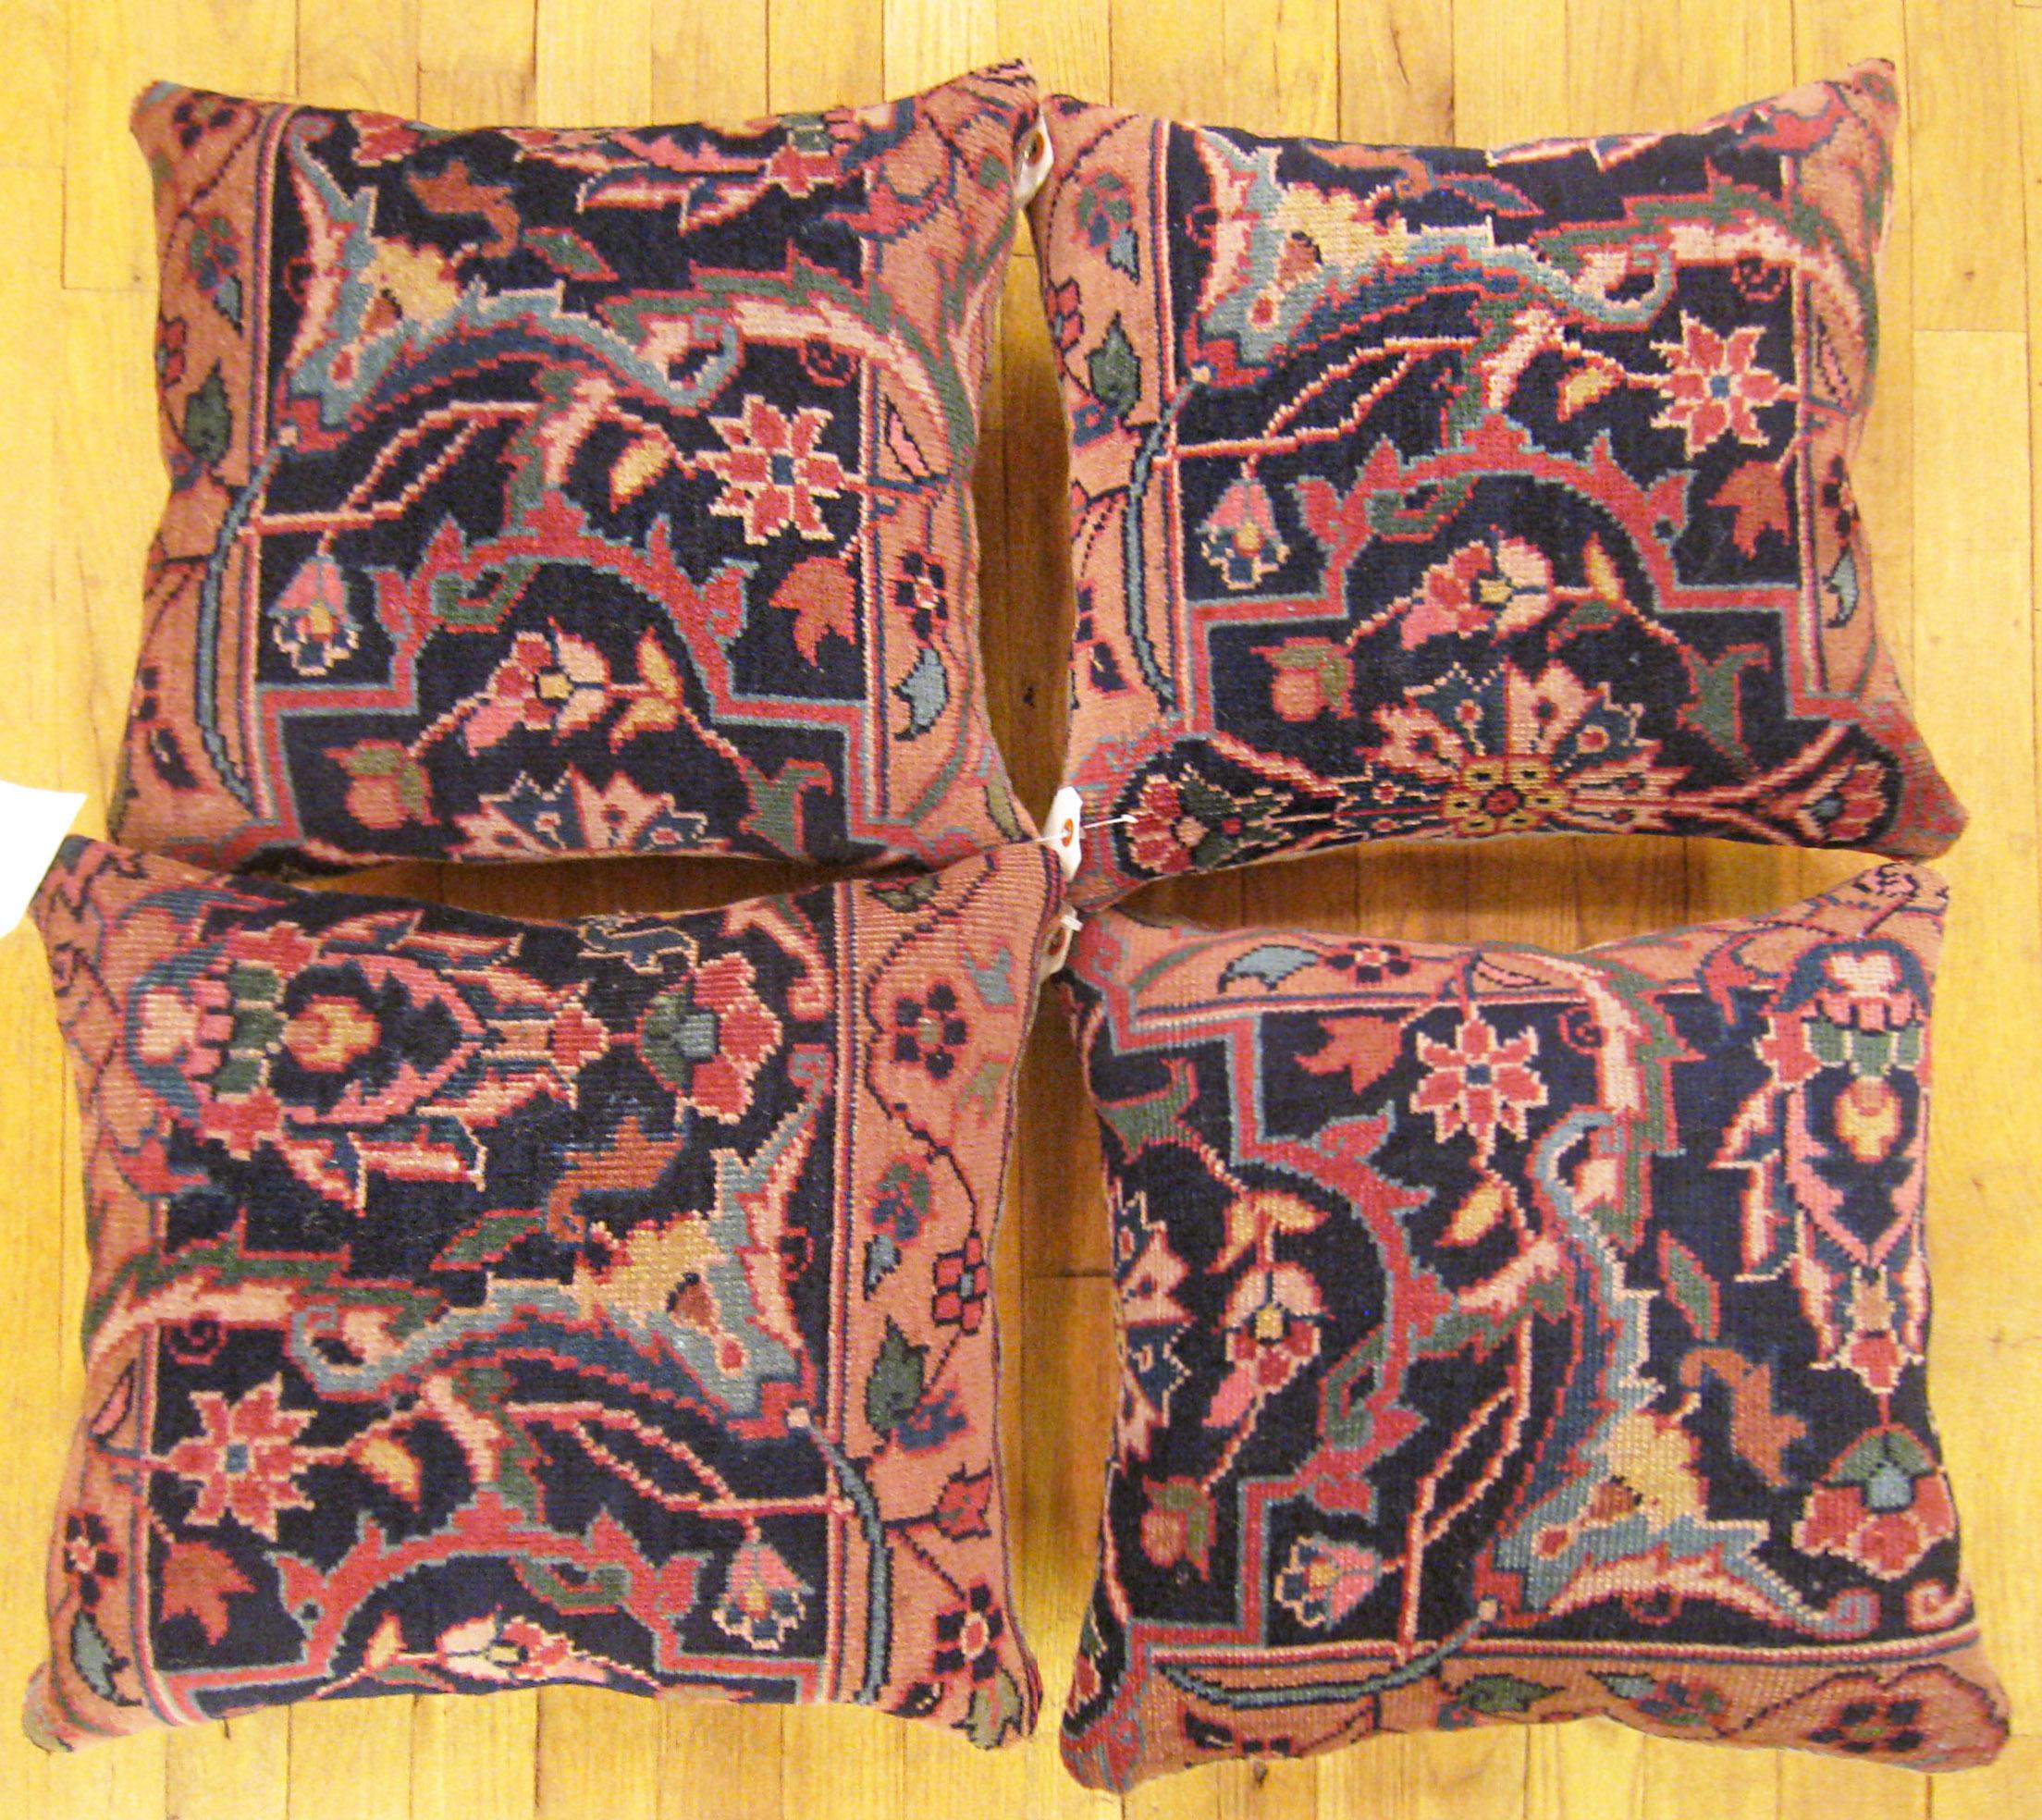 A set of Antique Indian Agra Rug Pillows ; size 1'6” x 1'4” Each.

An antique decorative pillows with floral elements allover a coral central field, size 1'6” x 1'4” each. This lovely decorative pillow features an antique fabric of a Agra rug on